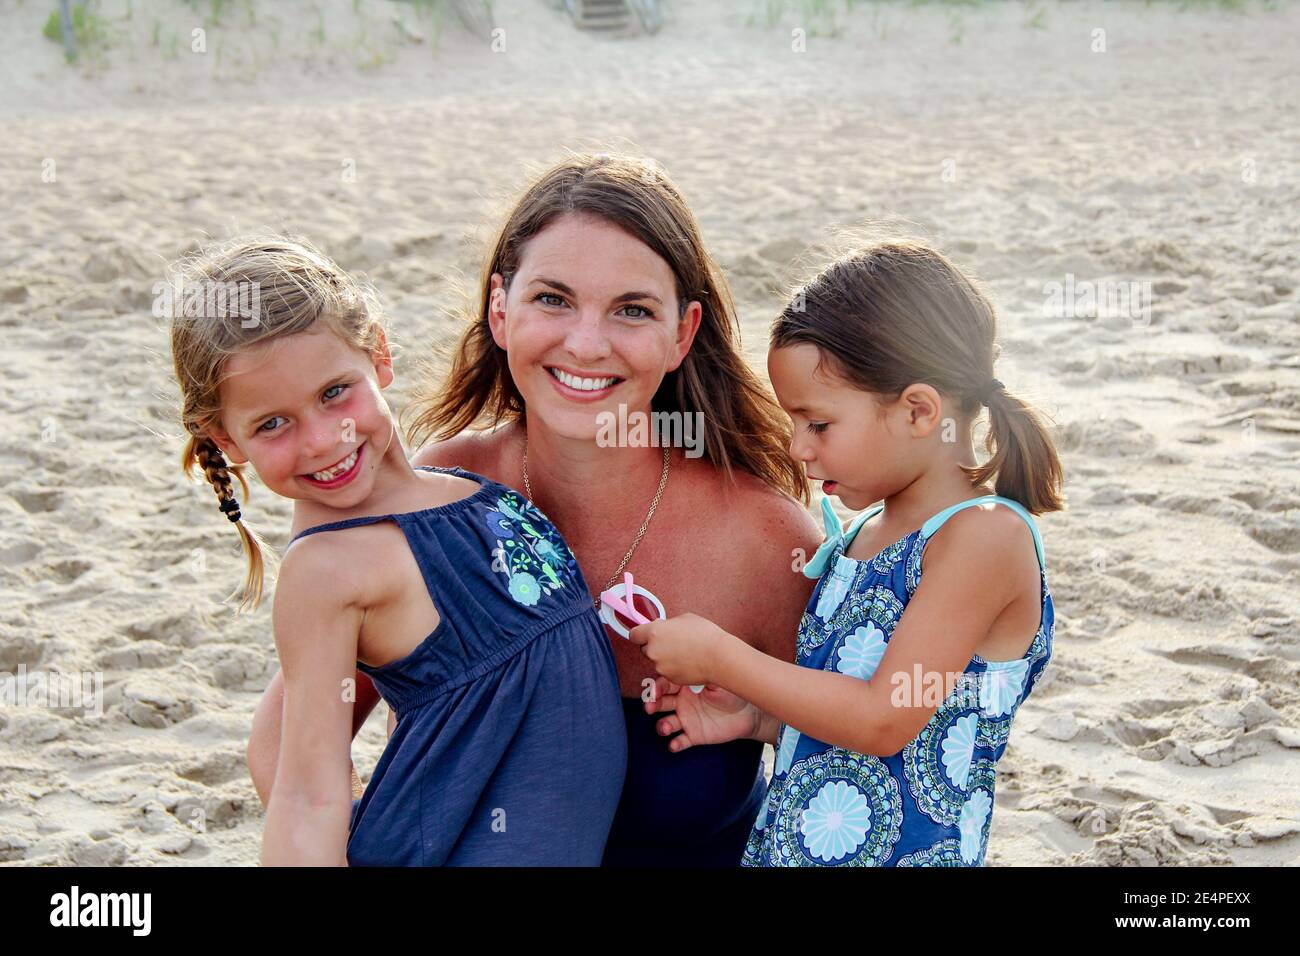 Brunette, smiley mother and two beautiful daughters spending quality time at a sandy beach Stock Photo